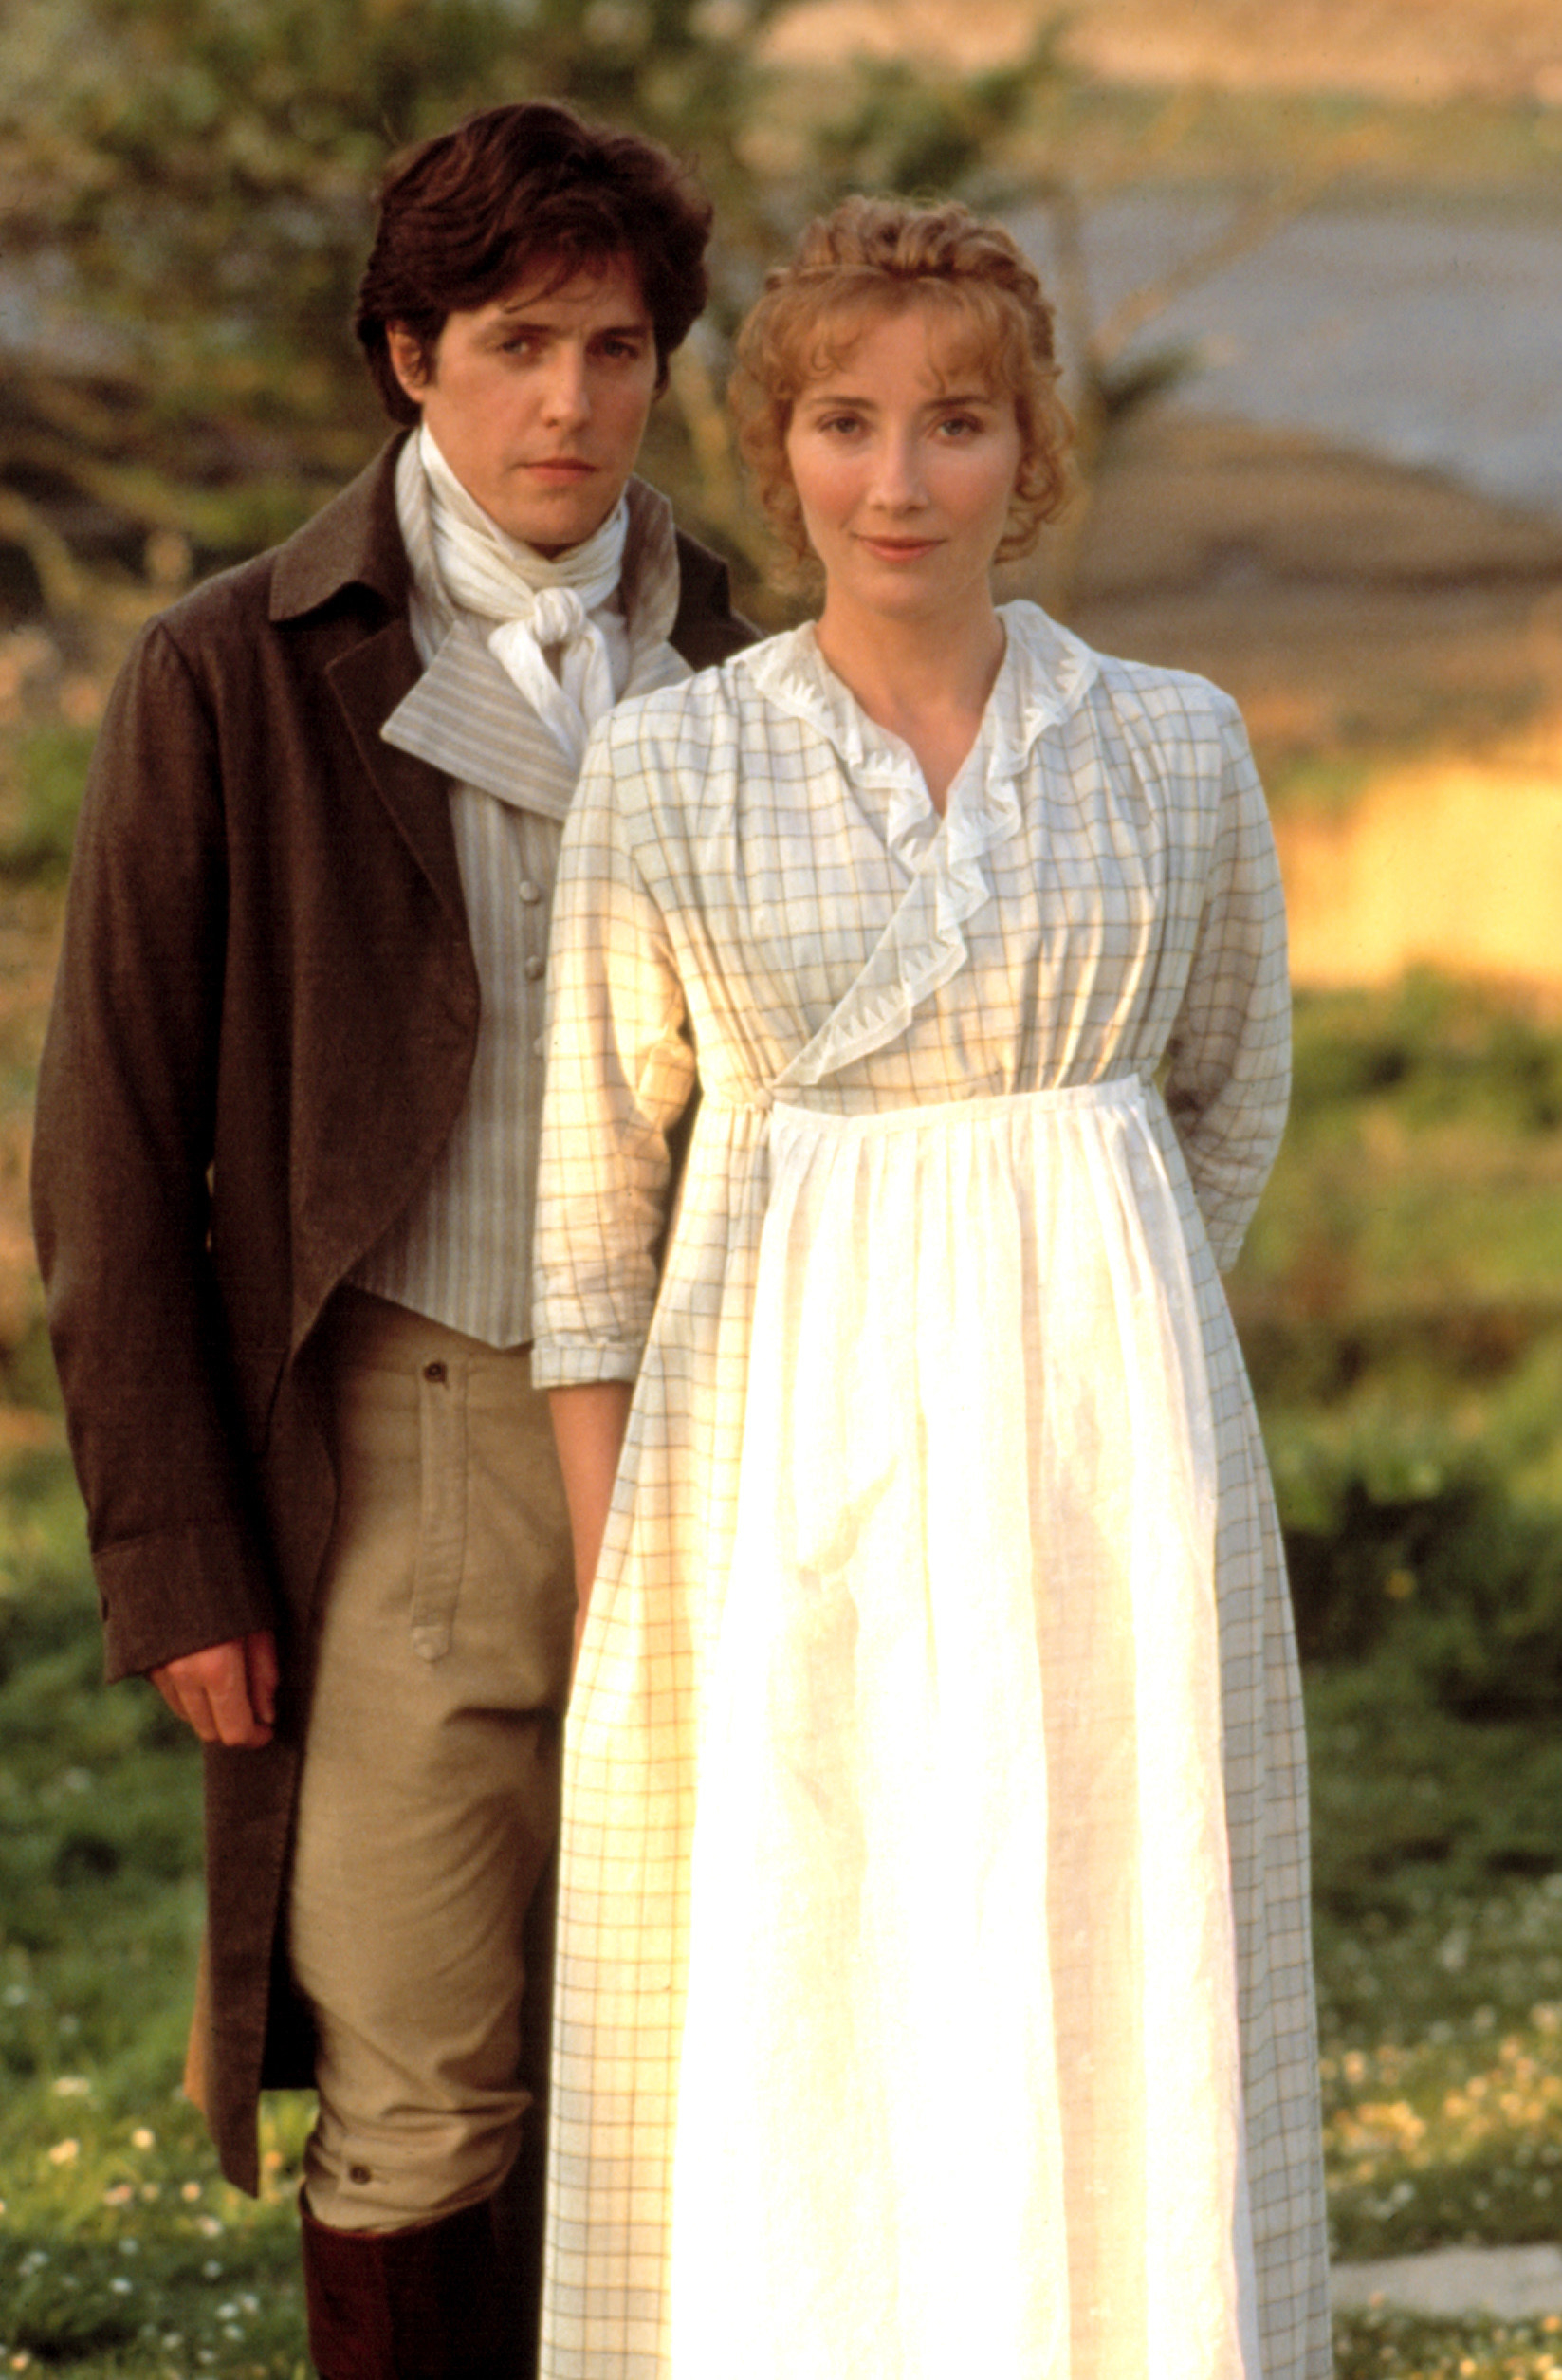 Hugh and Emma in period costumes